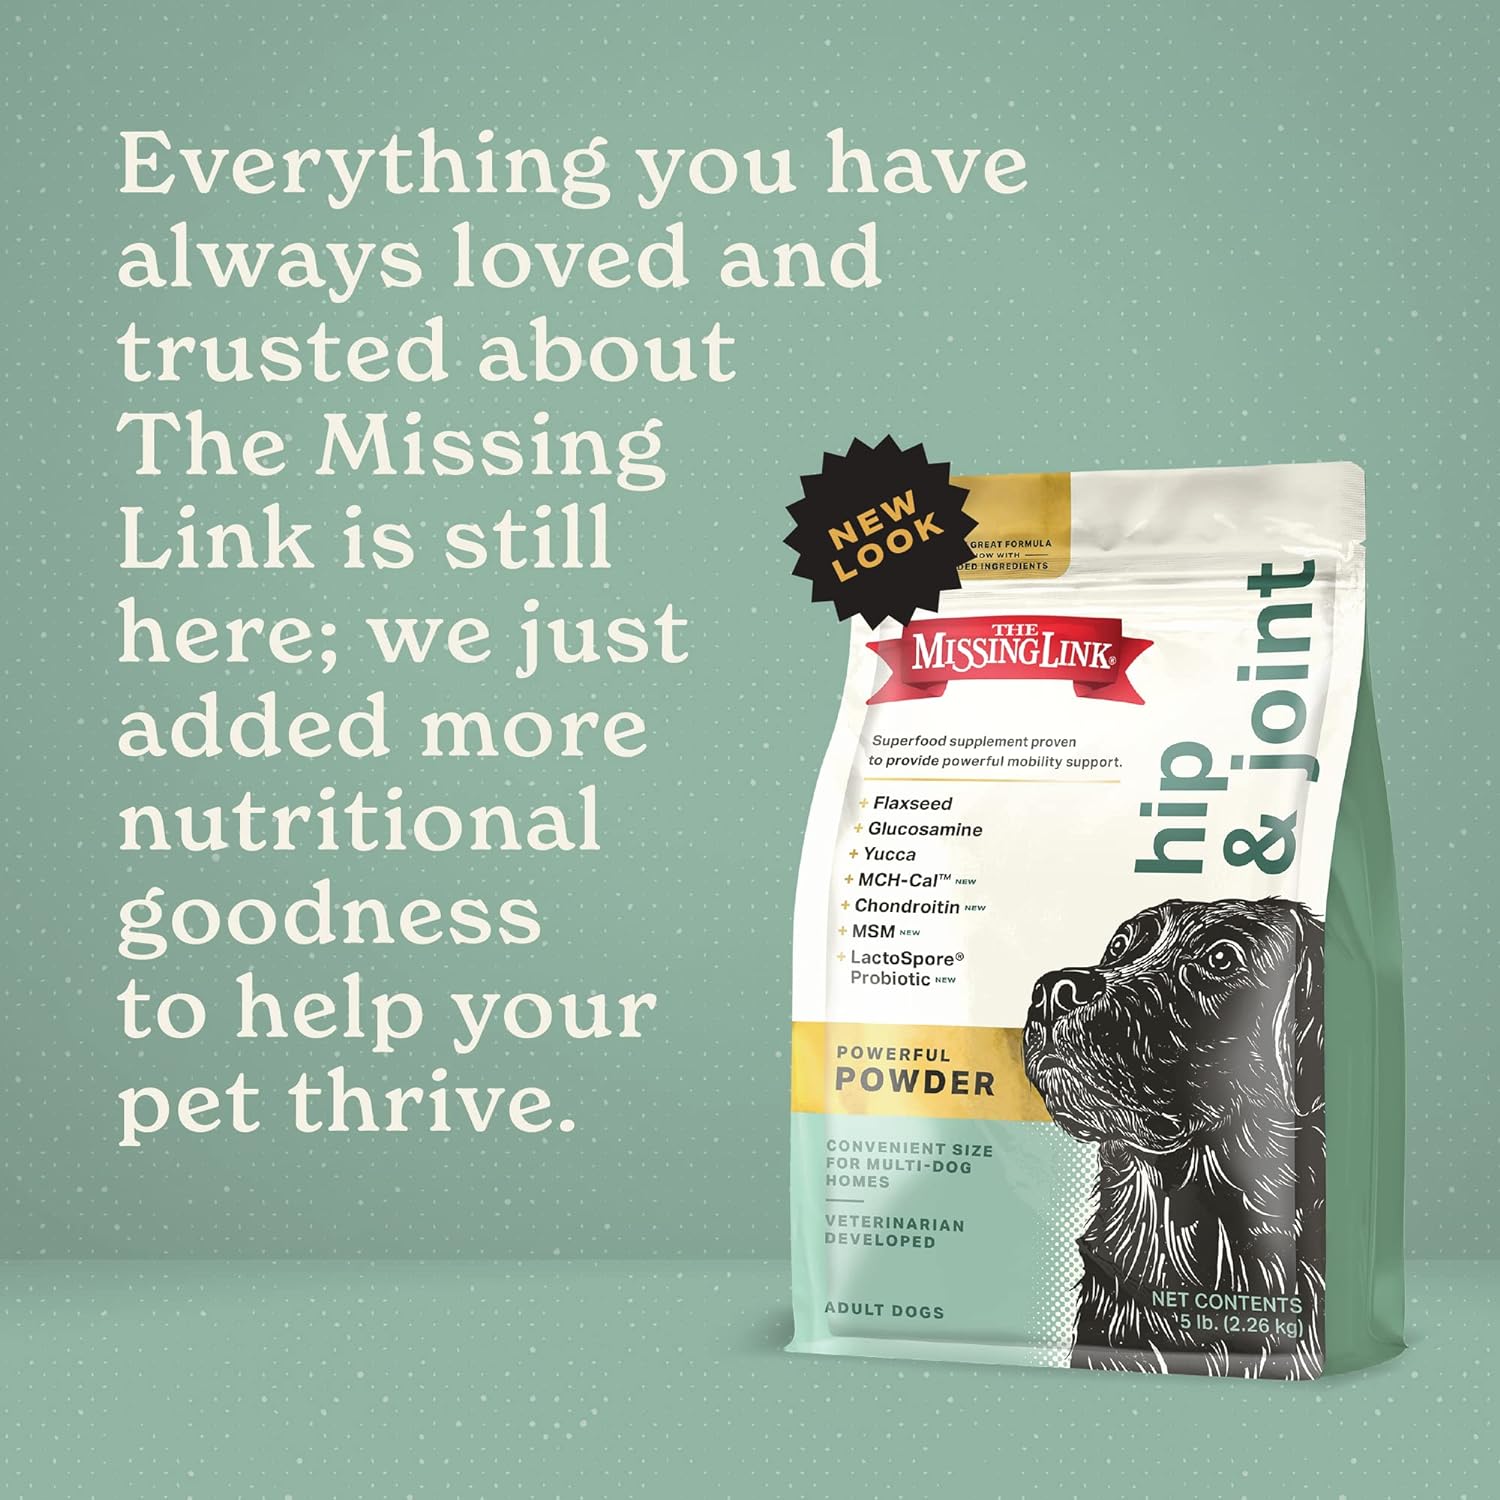 The Missing Link Hip & Joint + Probiotics Supplement 5lb Bag - Superfood Powder for Dog Cartilage & Bone Health, Joint Mobility & Flexibility : Pet Supplements And Vitamins : Pet Supplies